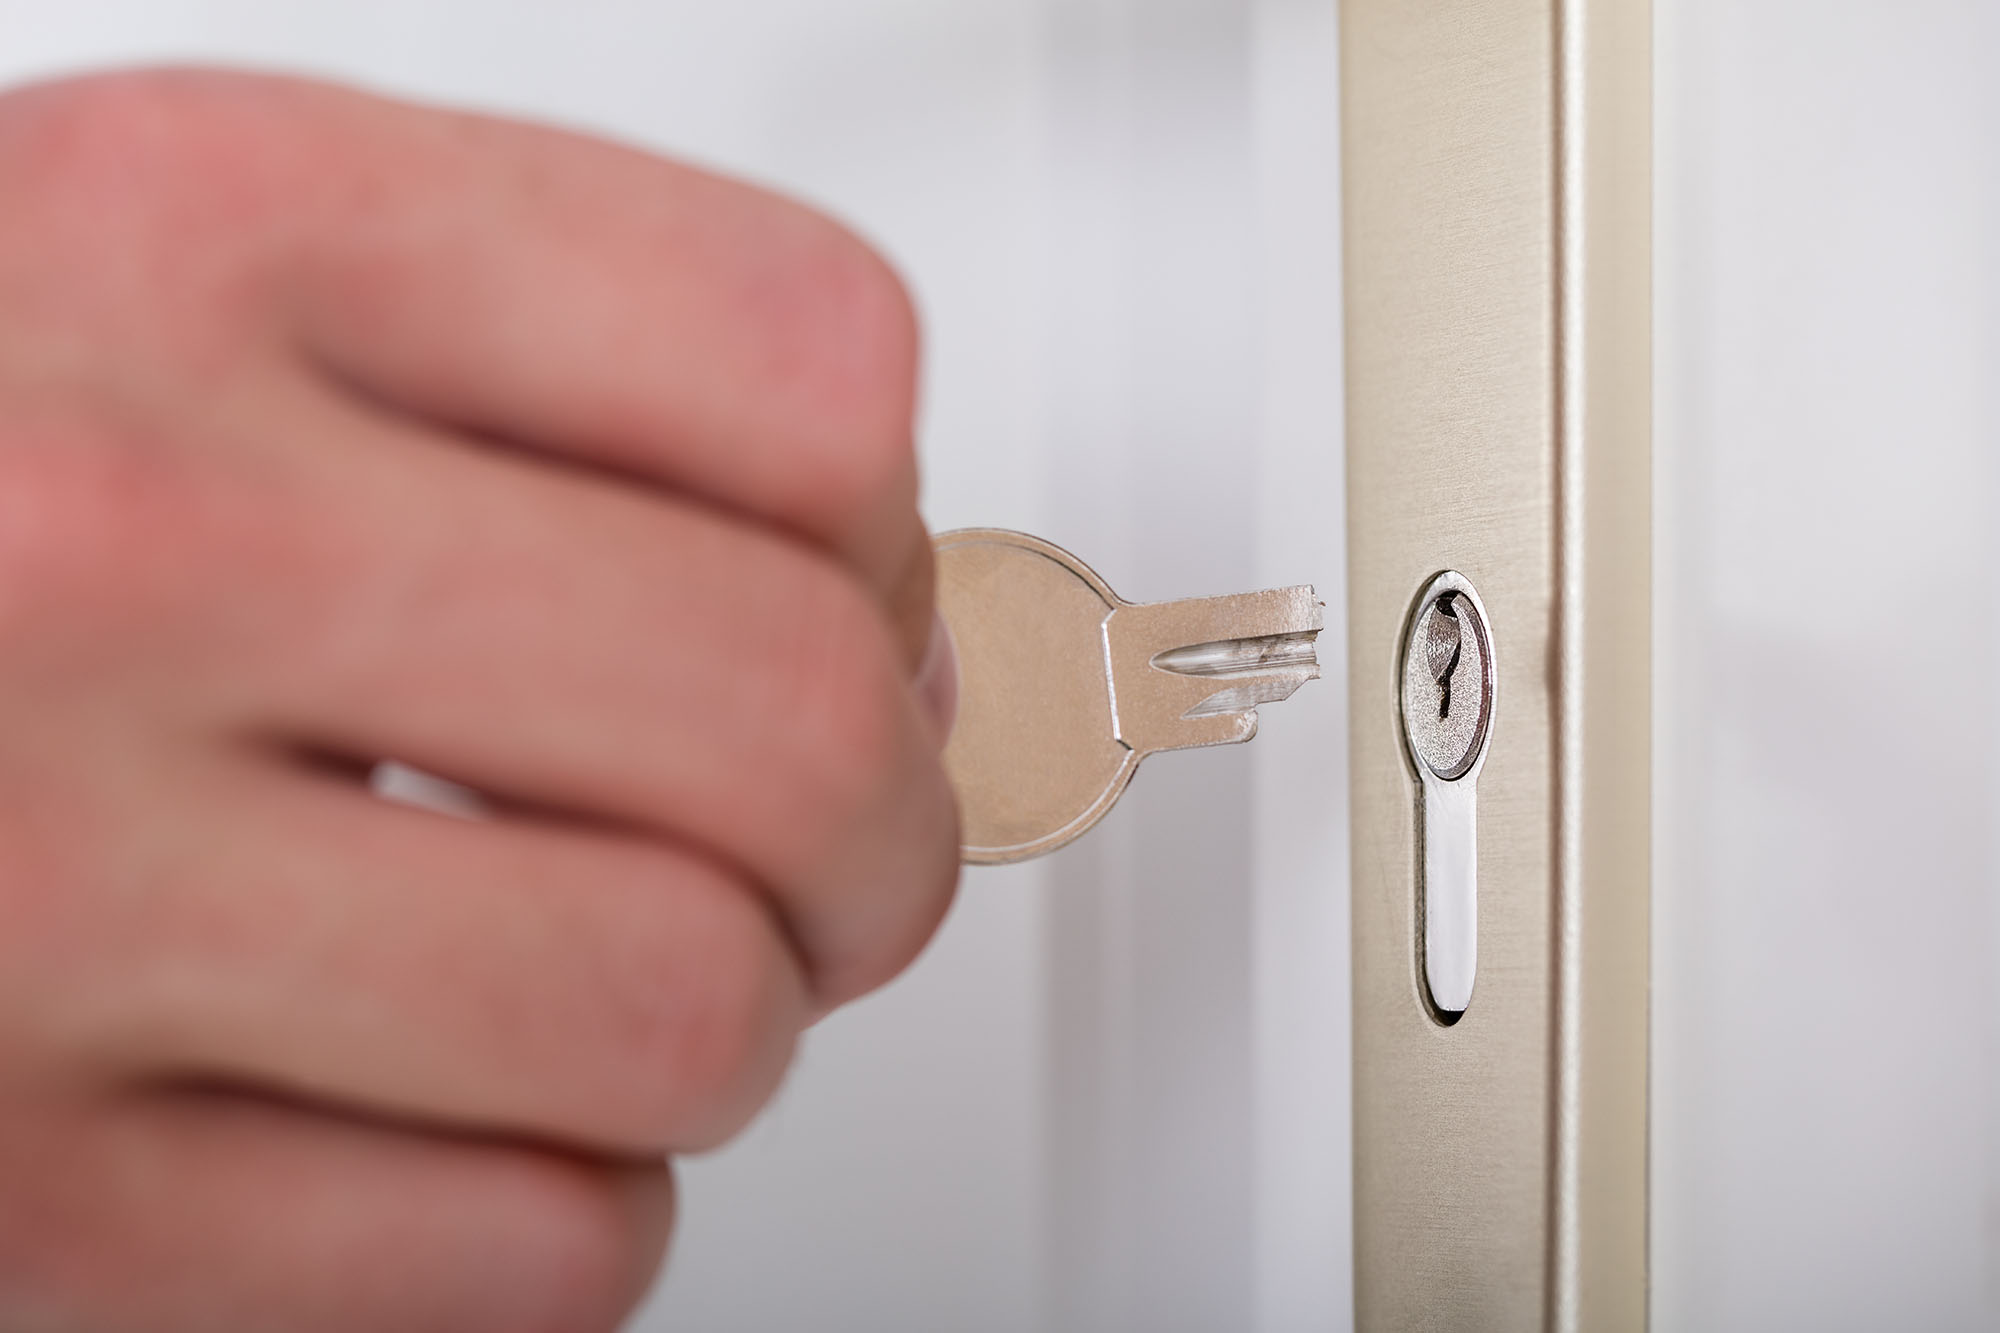 How To Get A Broken Key Out Of A Lock